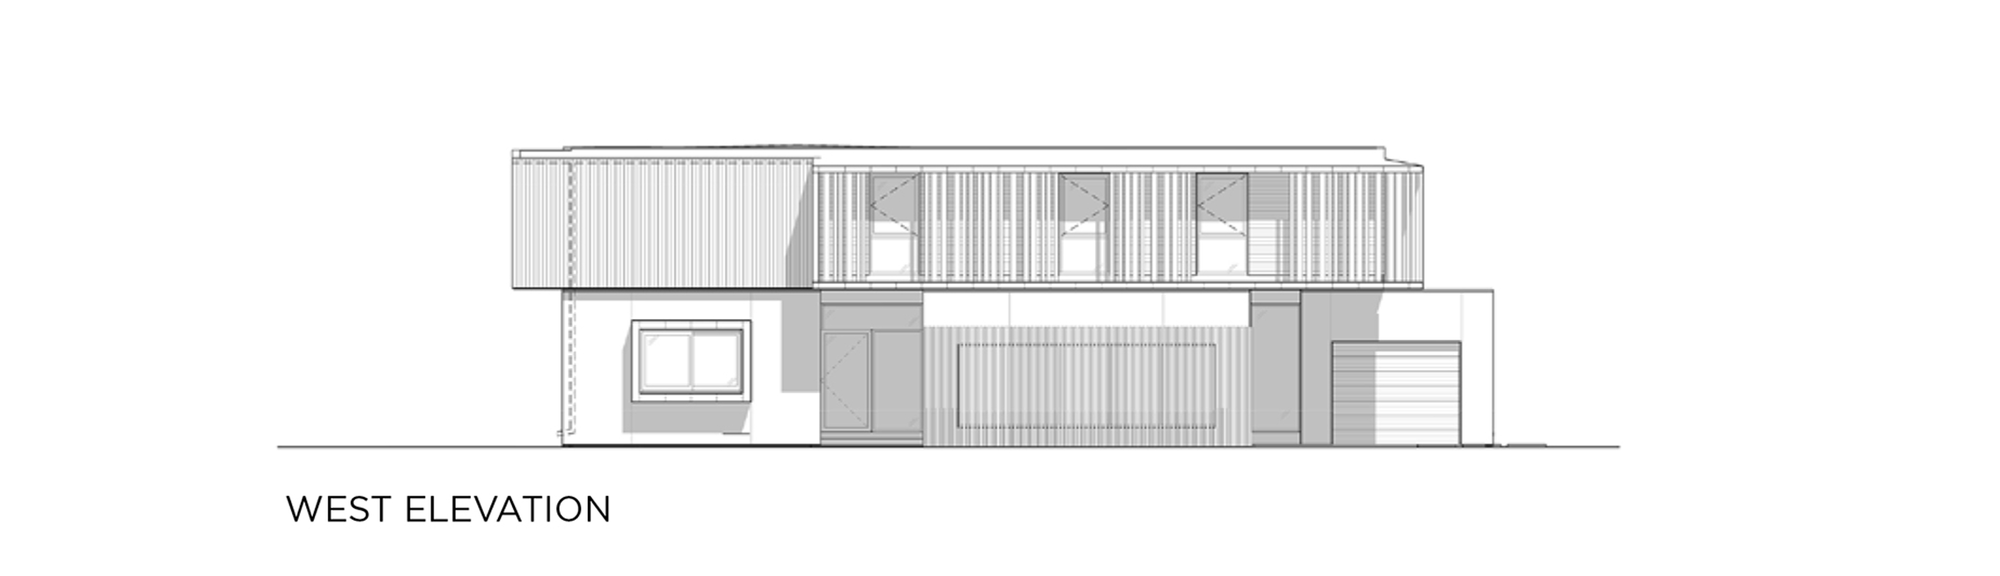 baulinder-haus-hufft-projects_west_elevation